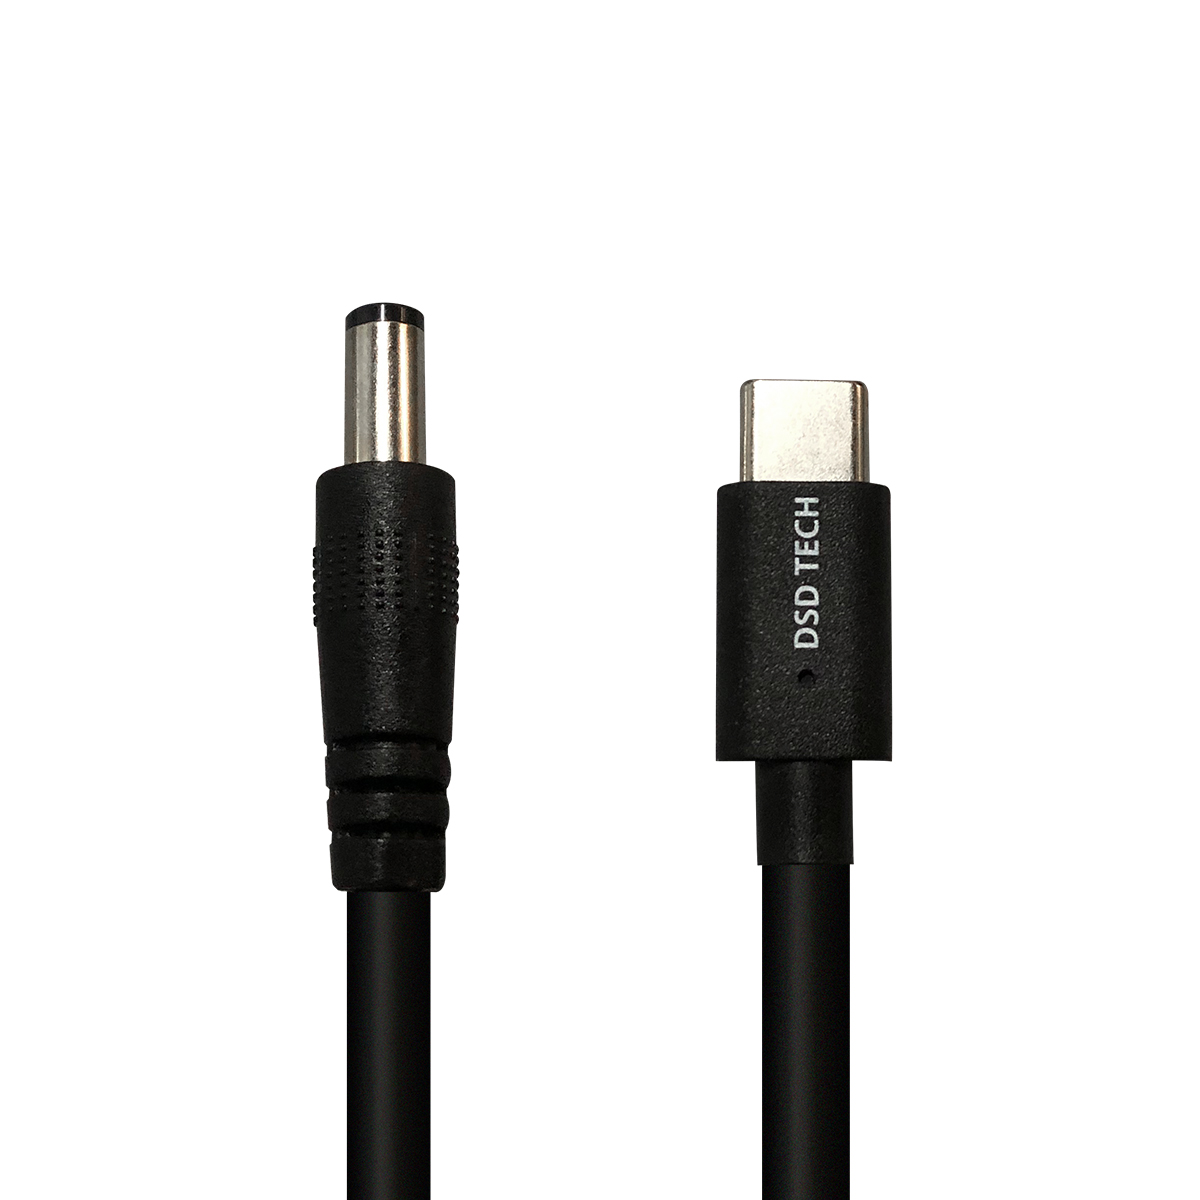 MagicConn SH-CP15A  USB Type C PD to DC Cable